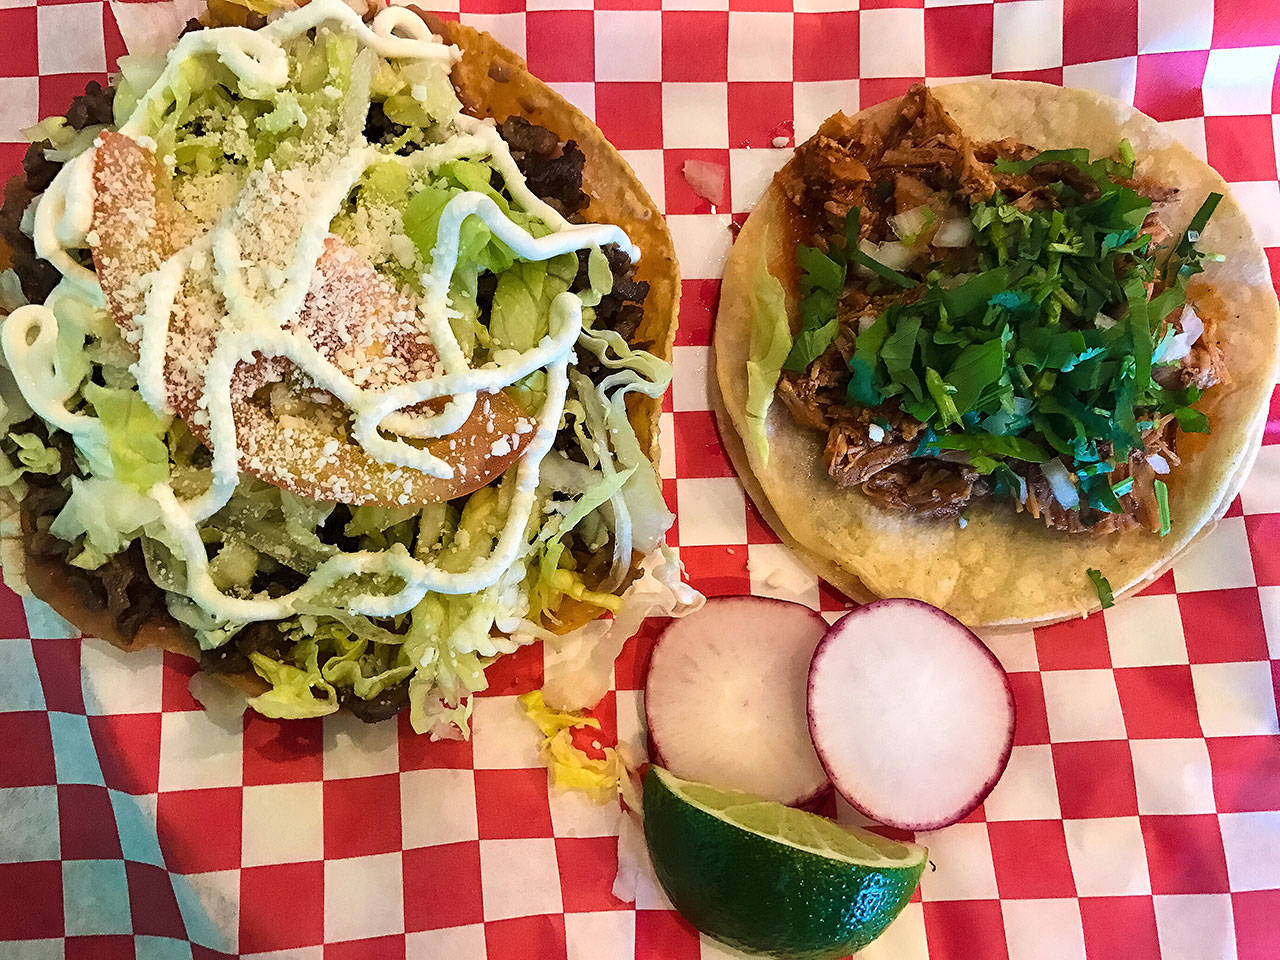 At Taco-Book, $4 buys a plate with a pork tostada and chicken taco, two of many menu options. (Andrea Brown / The Herald)